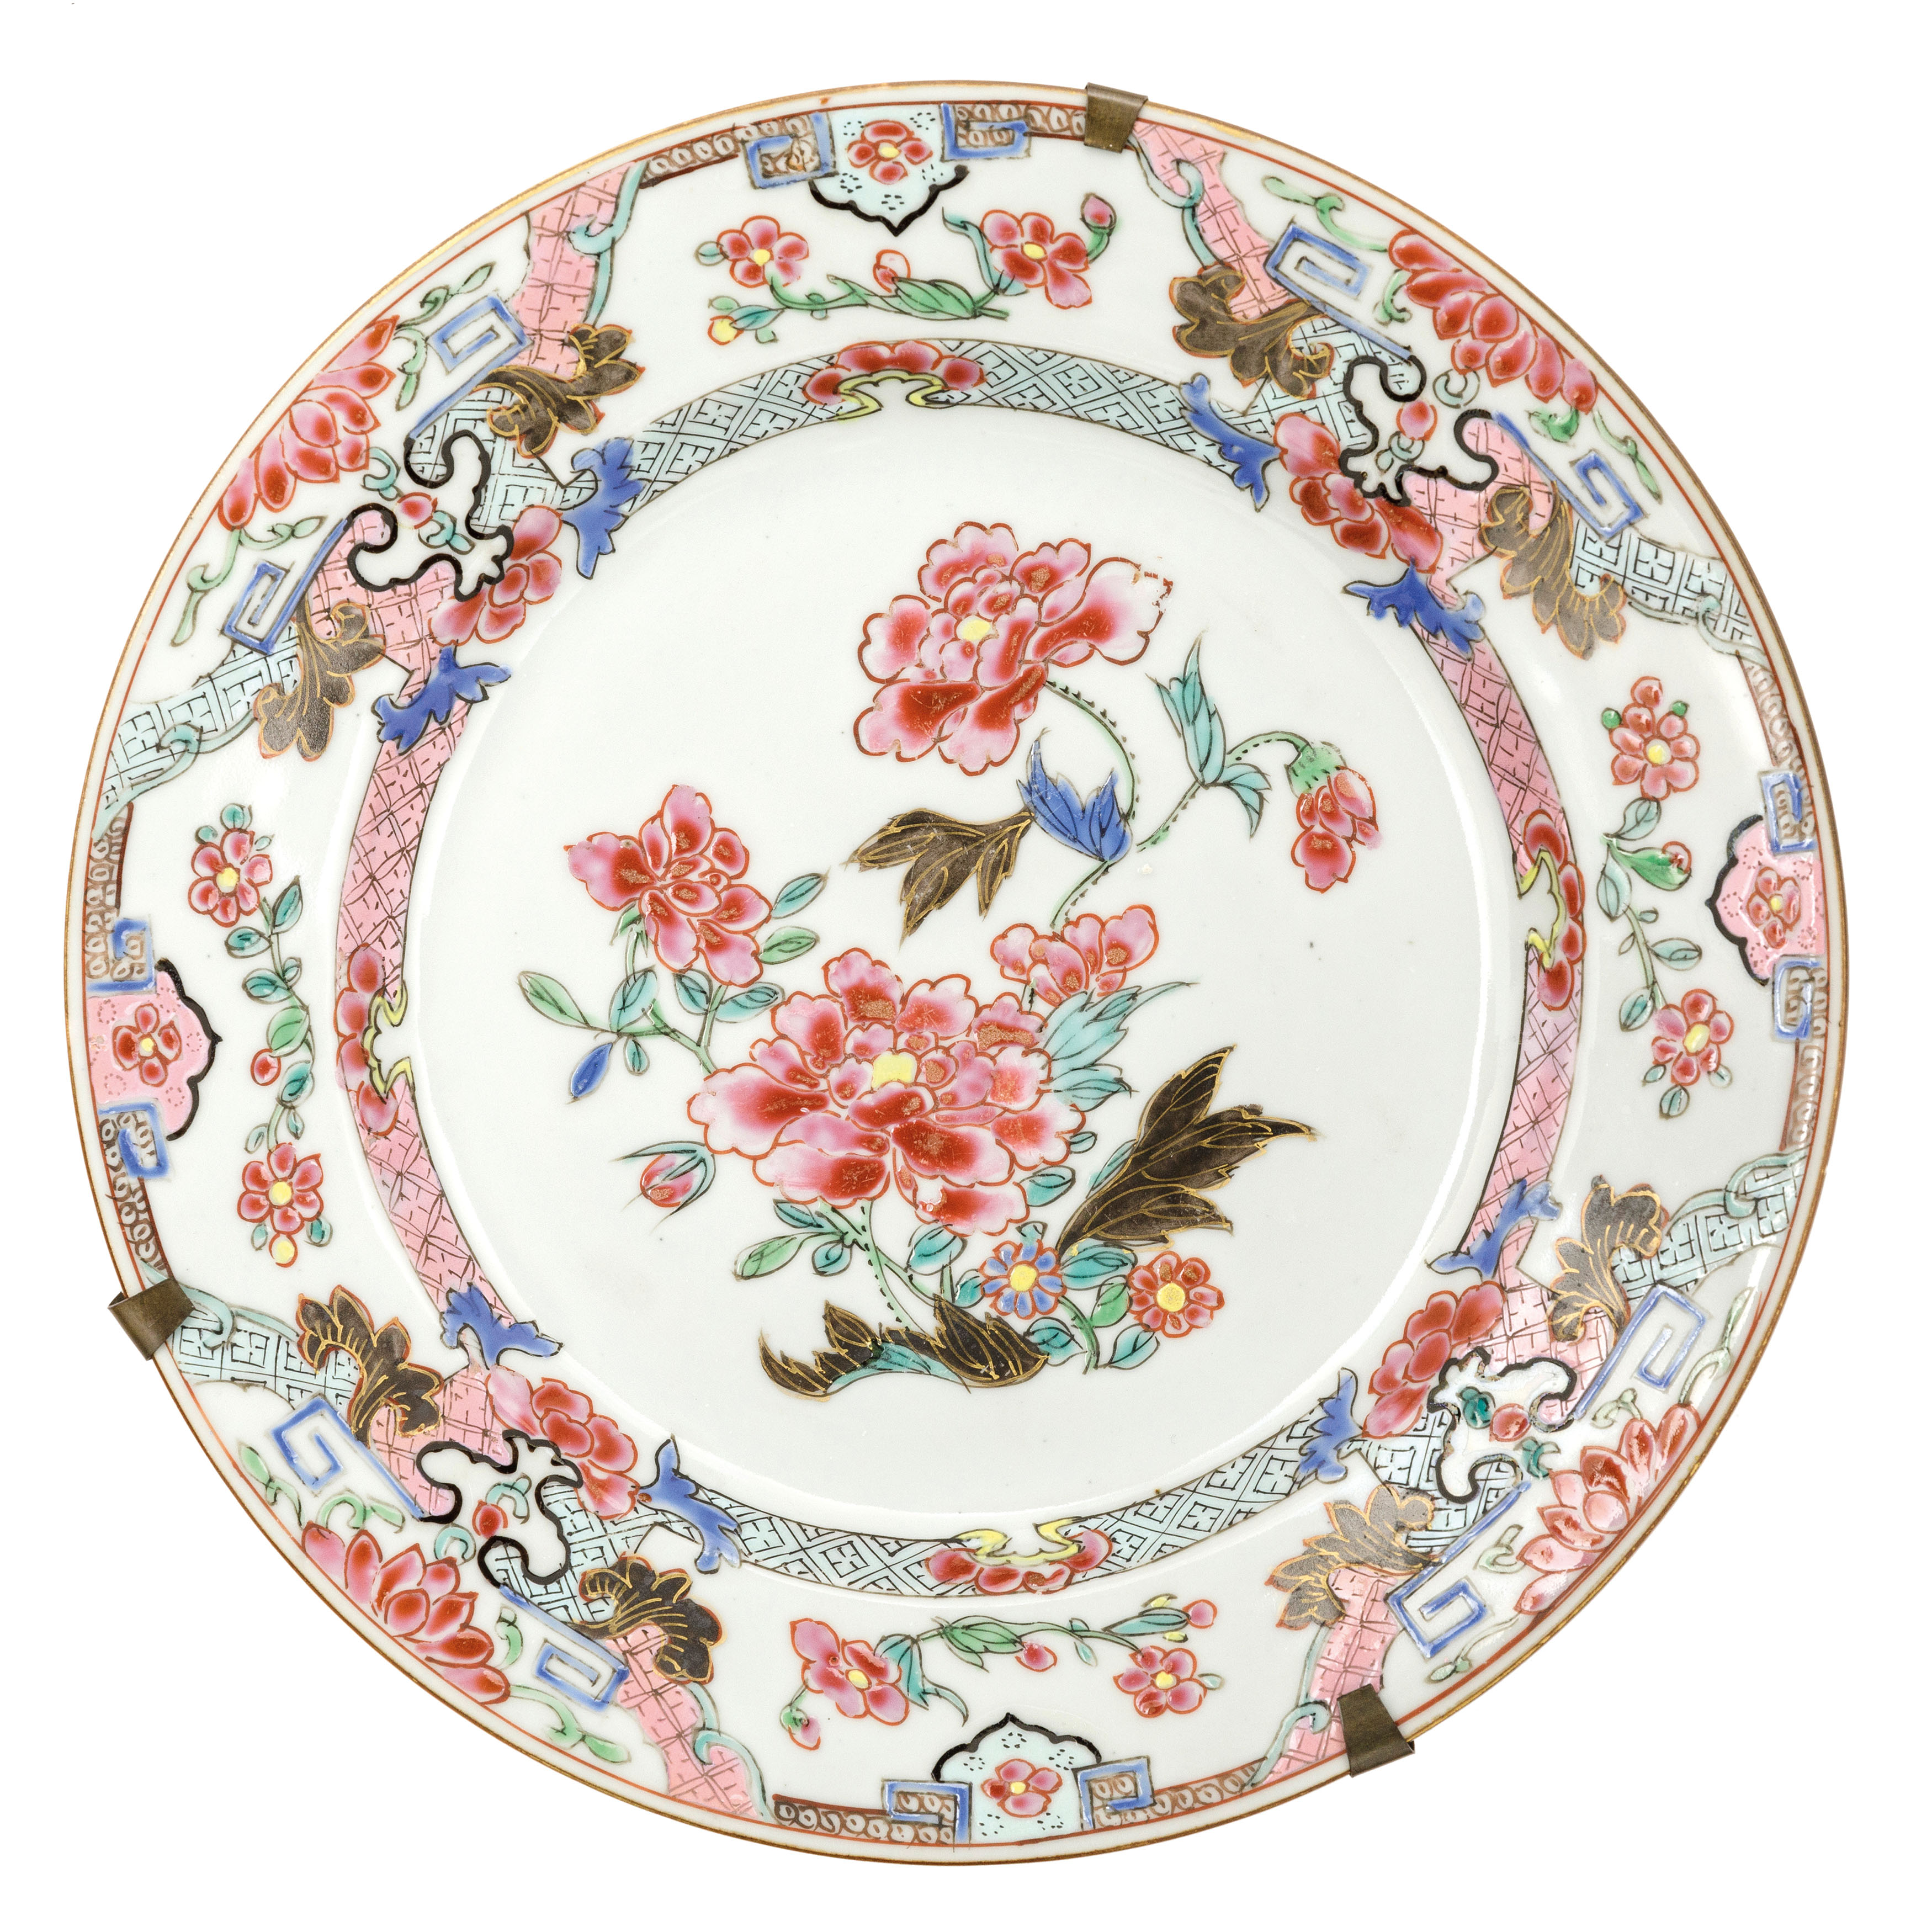 SIX DIFFERENT FAMILLE ROSE PORCELAIN DISHES, CHINA, MIDDLE 18TH CENTURY (6) - Image 6 of 6